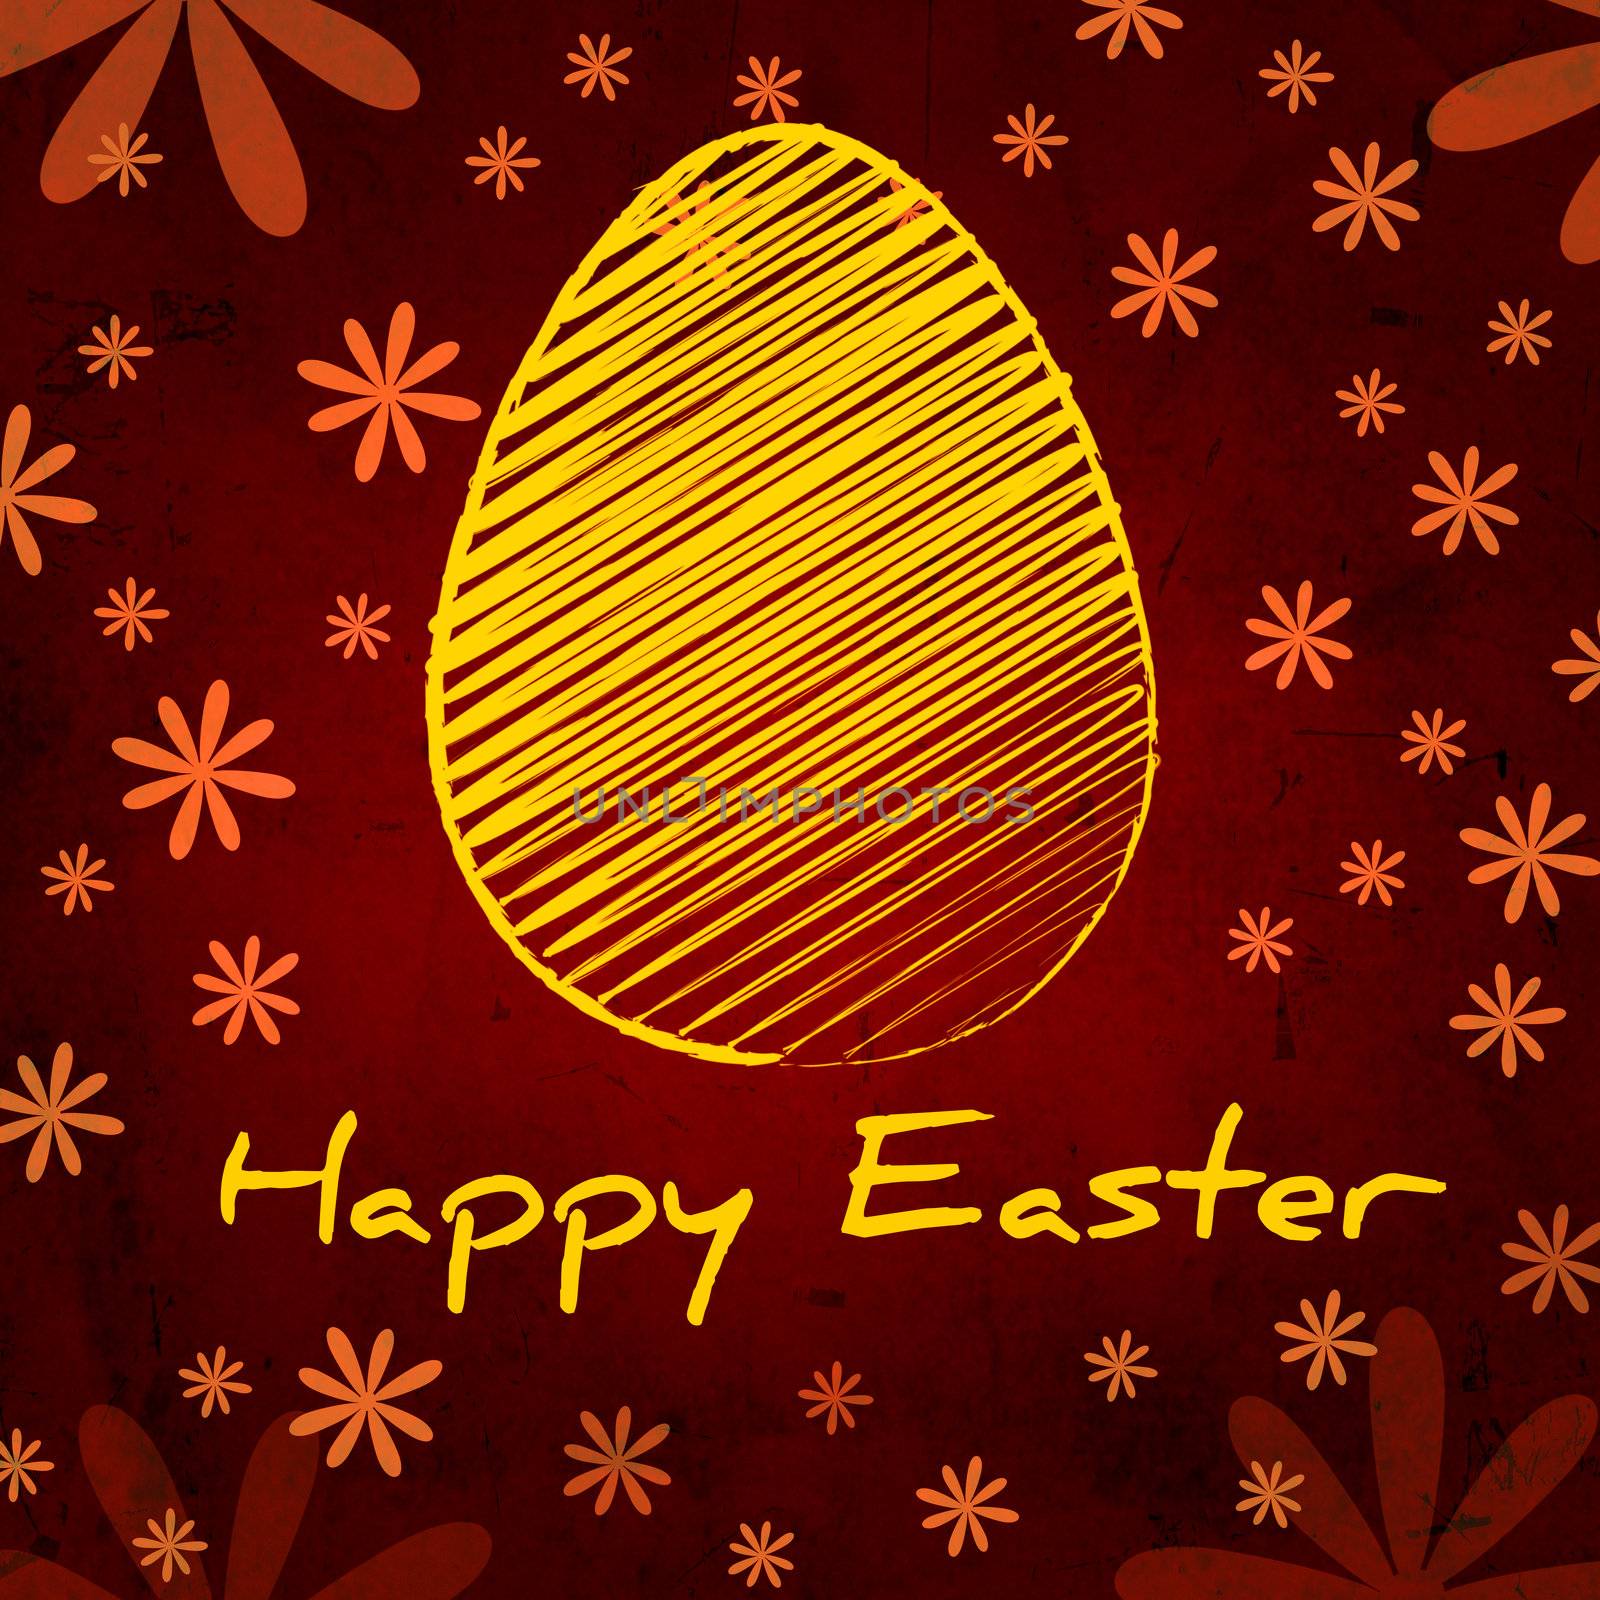 Happy Easter and yellow egg over brown old paper background with by marinini